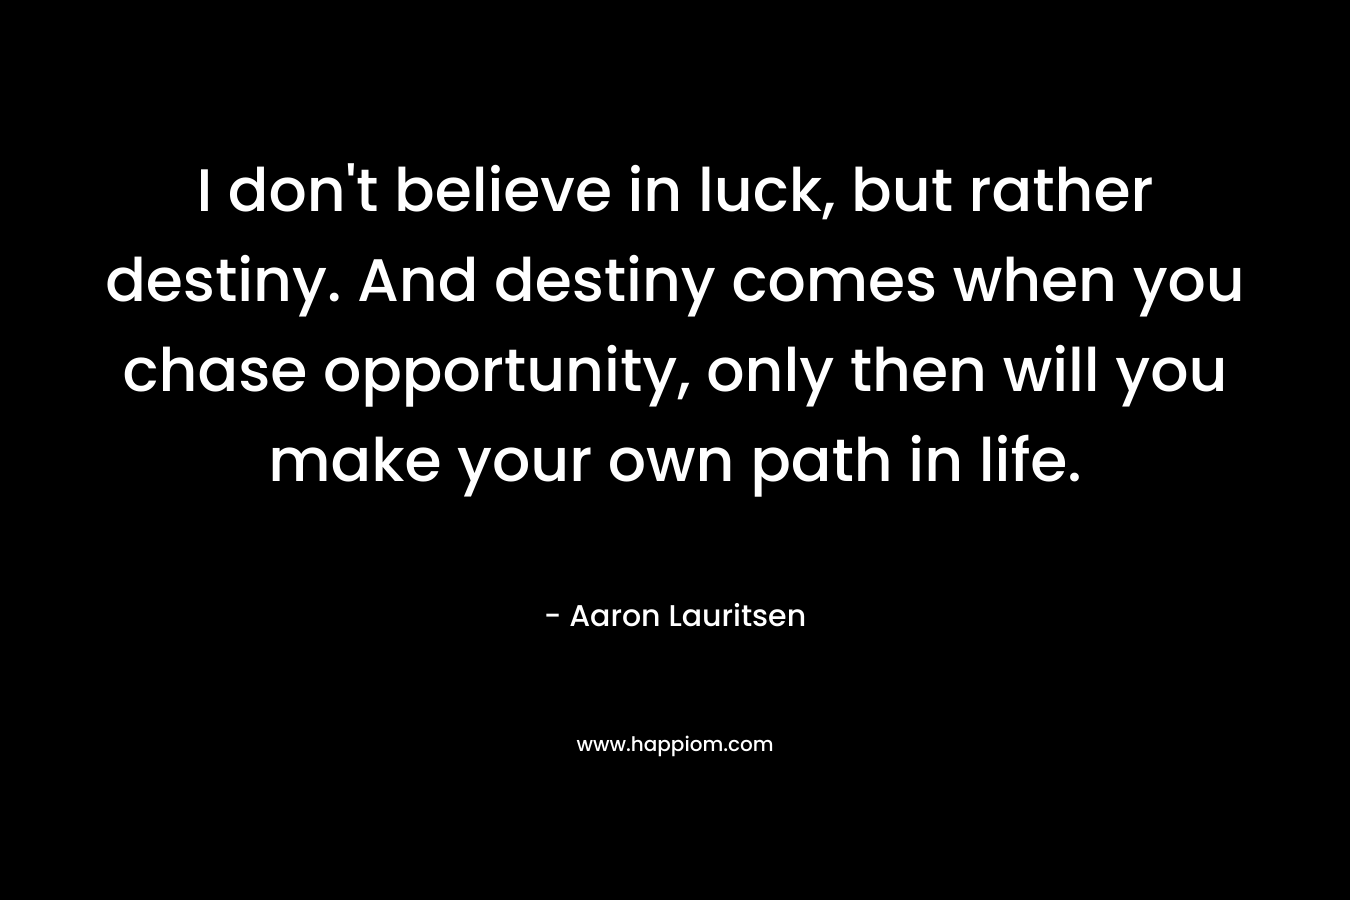 I don't believe in luck, but rather destiny. And destiny comes when you chase opportunity, only then will you make your own path in life.